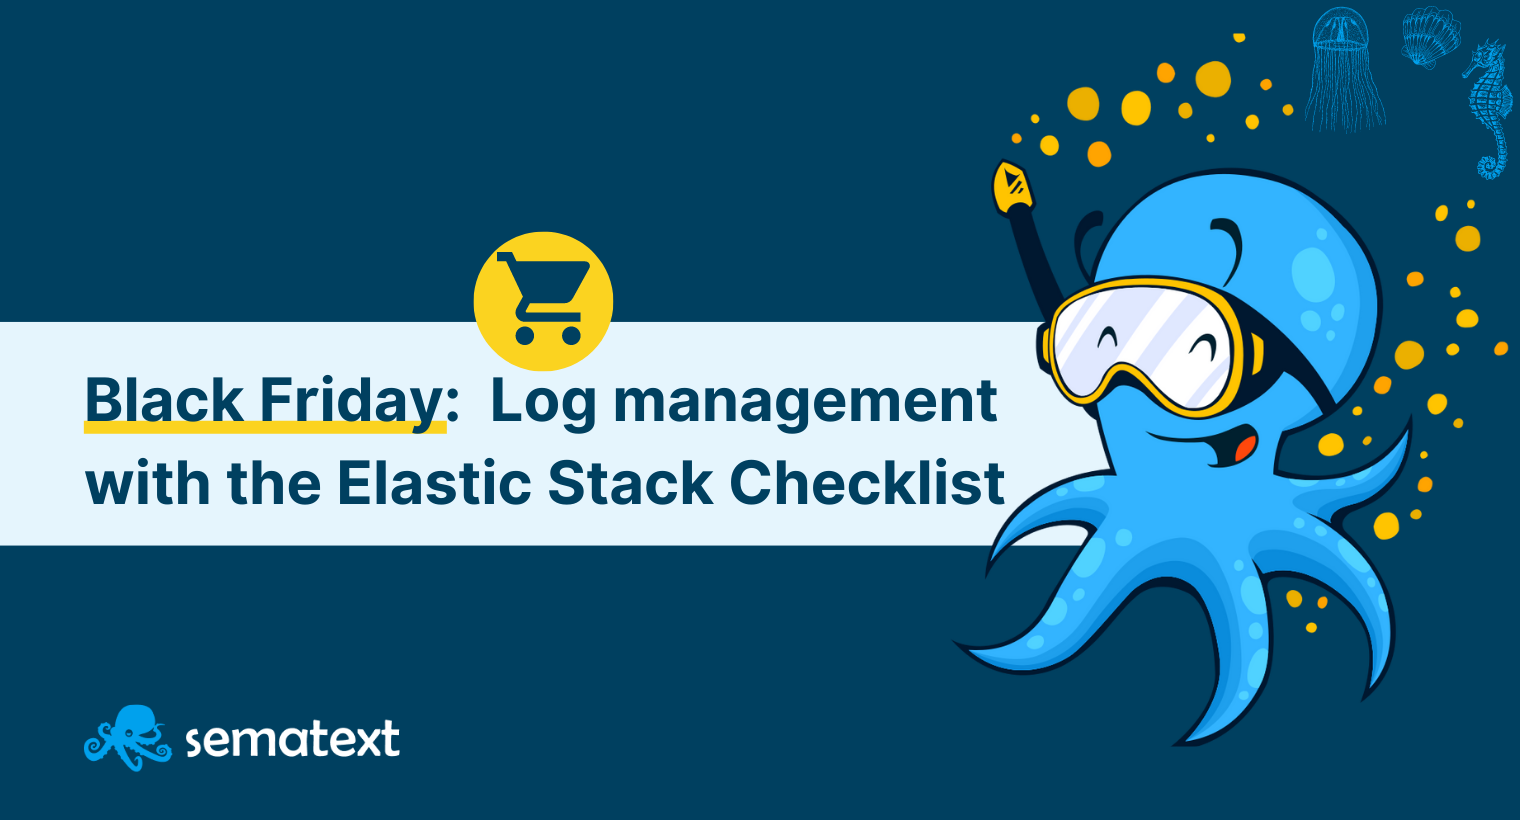 Black Friday: Log management with the Elastic Stack Checklist